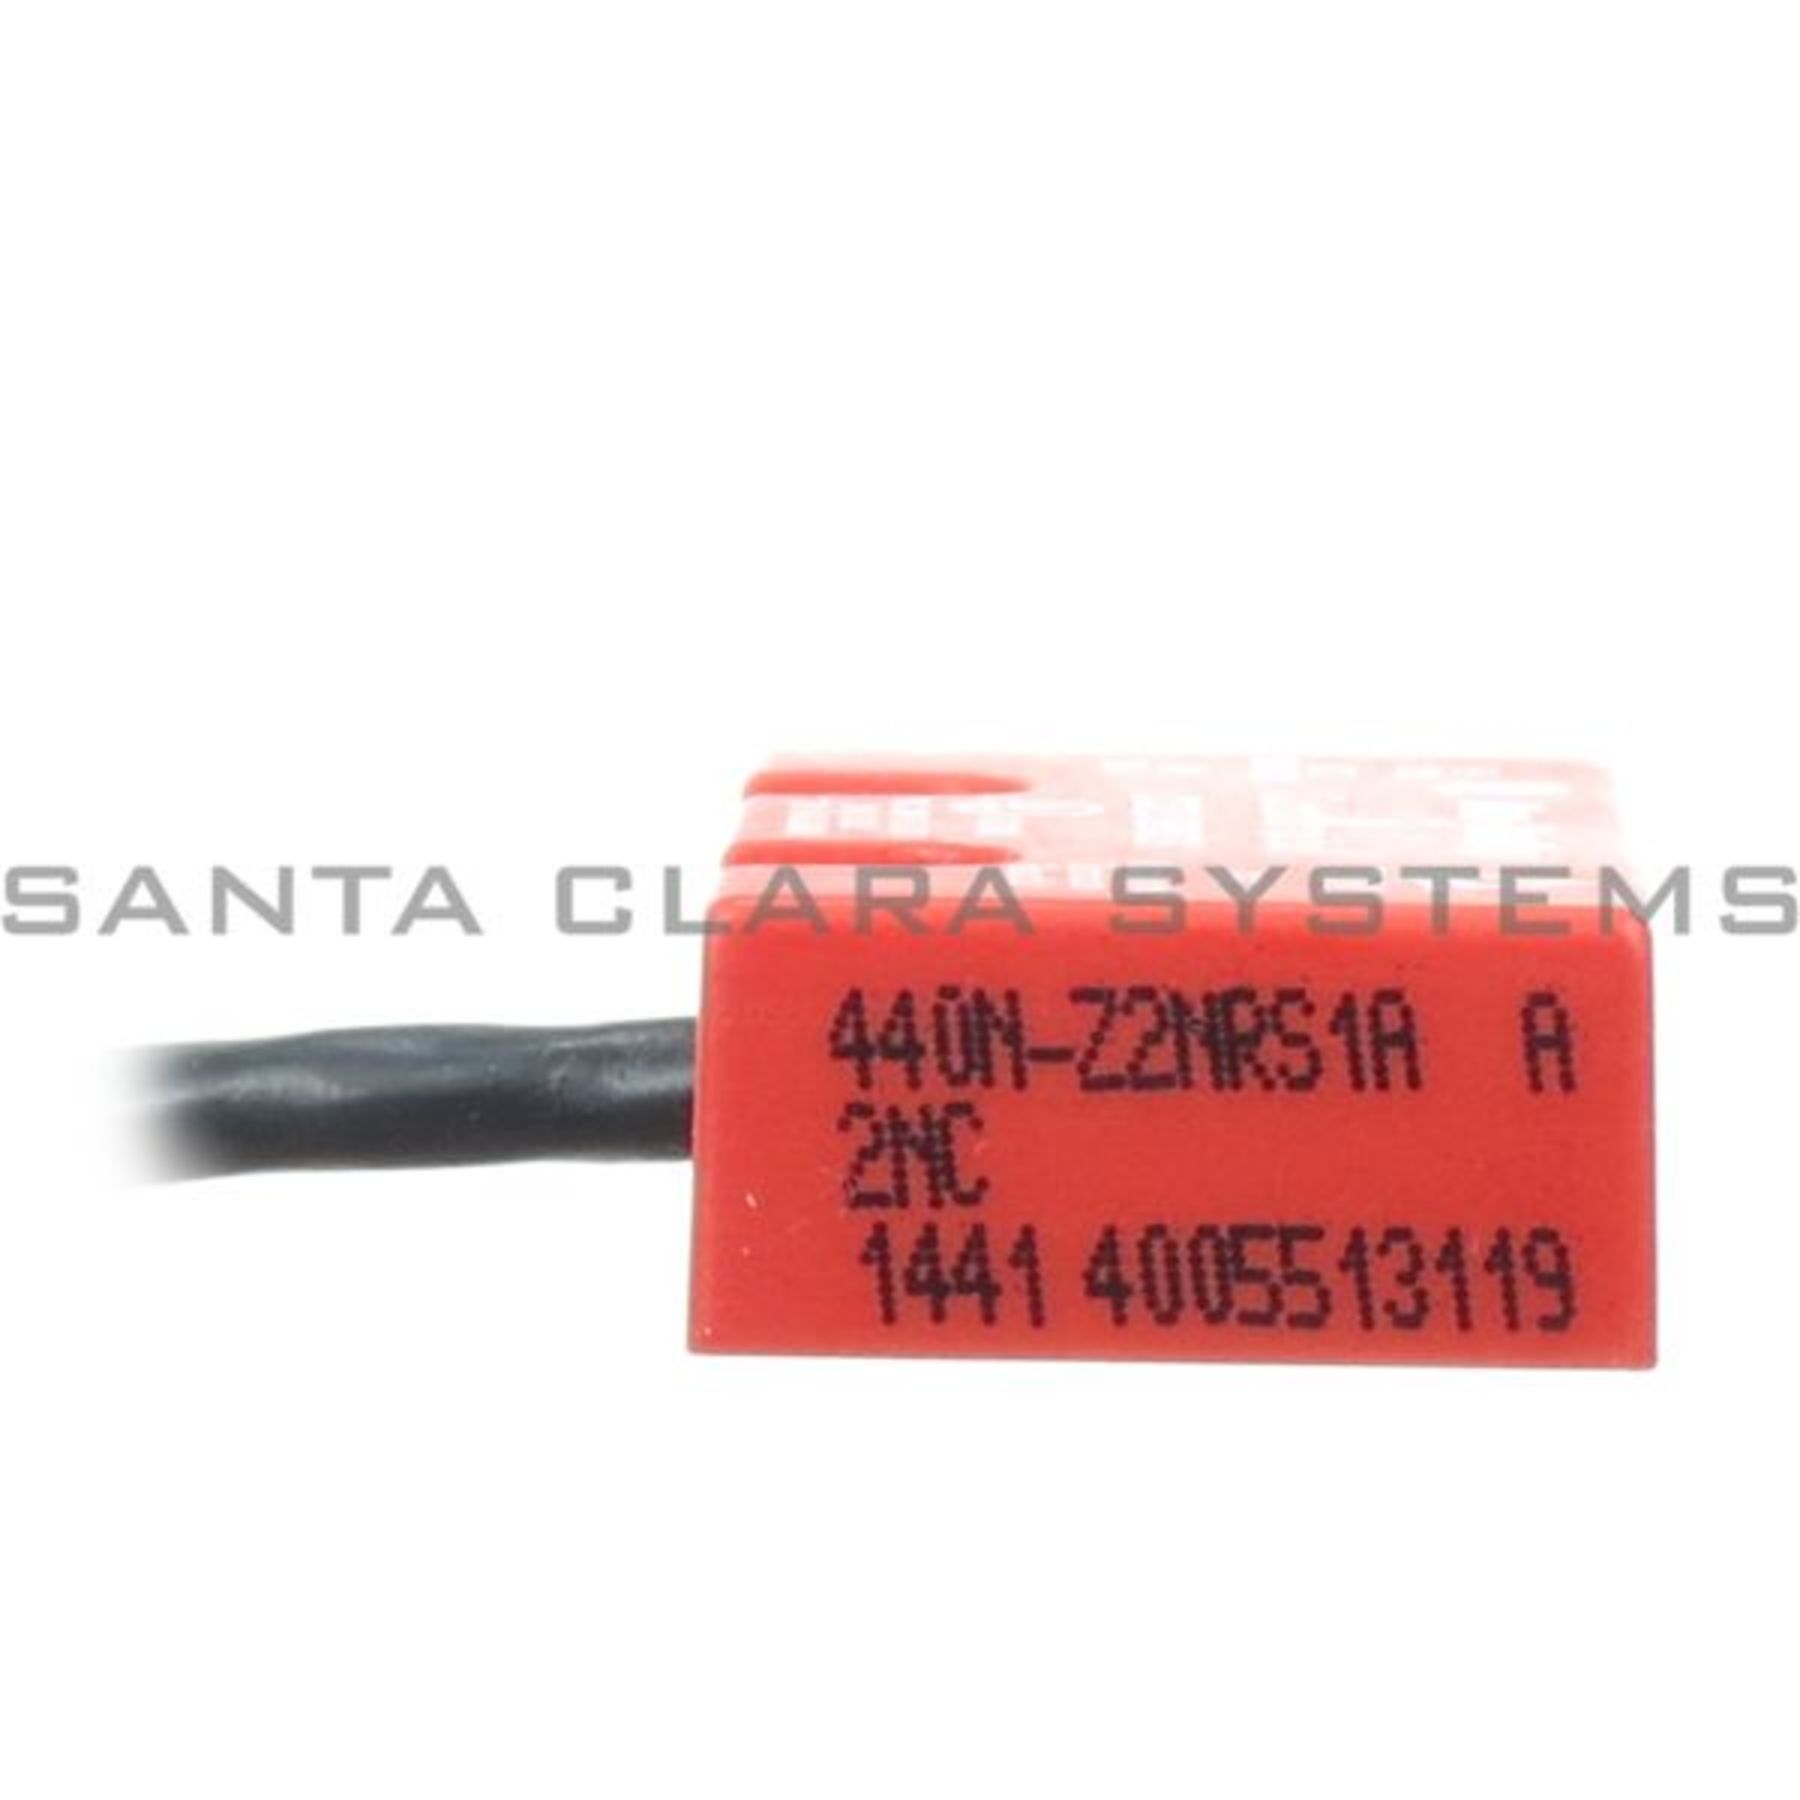 440N-Z2NRS1A Allen Bradley In stock and ready to ship - Santa 